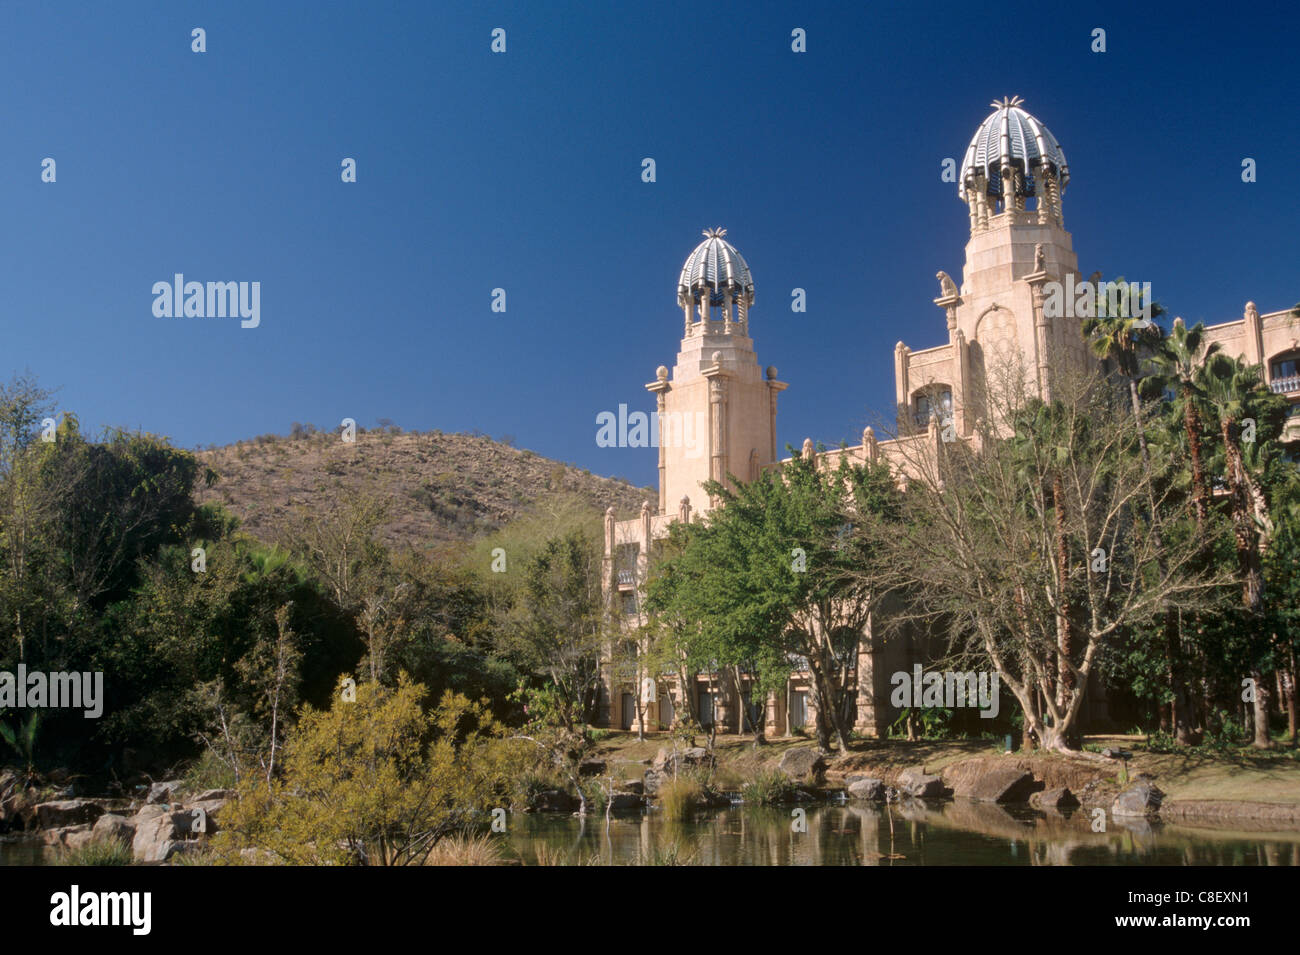 The Palace of the Lost City, major tourist attraction and hotel, Sun City, North West Province, South Africa Stock Photo